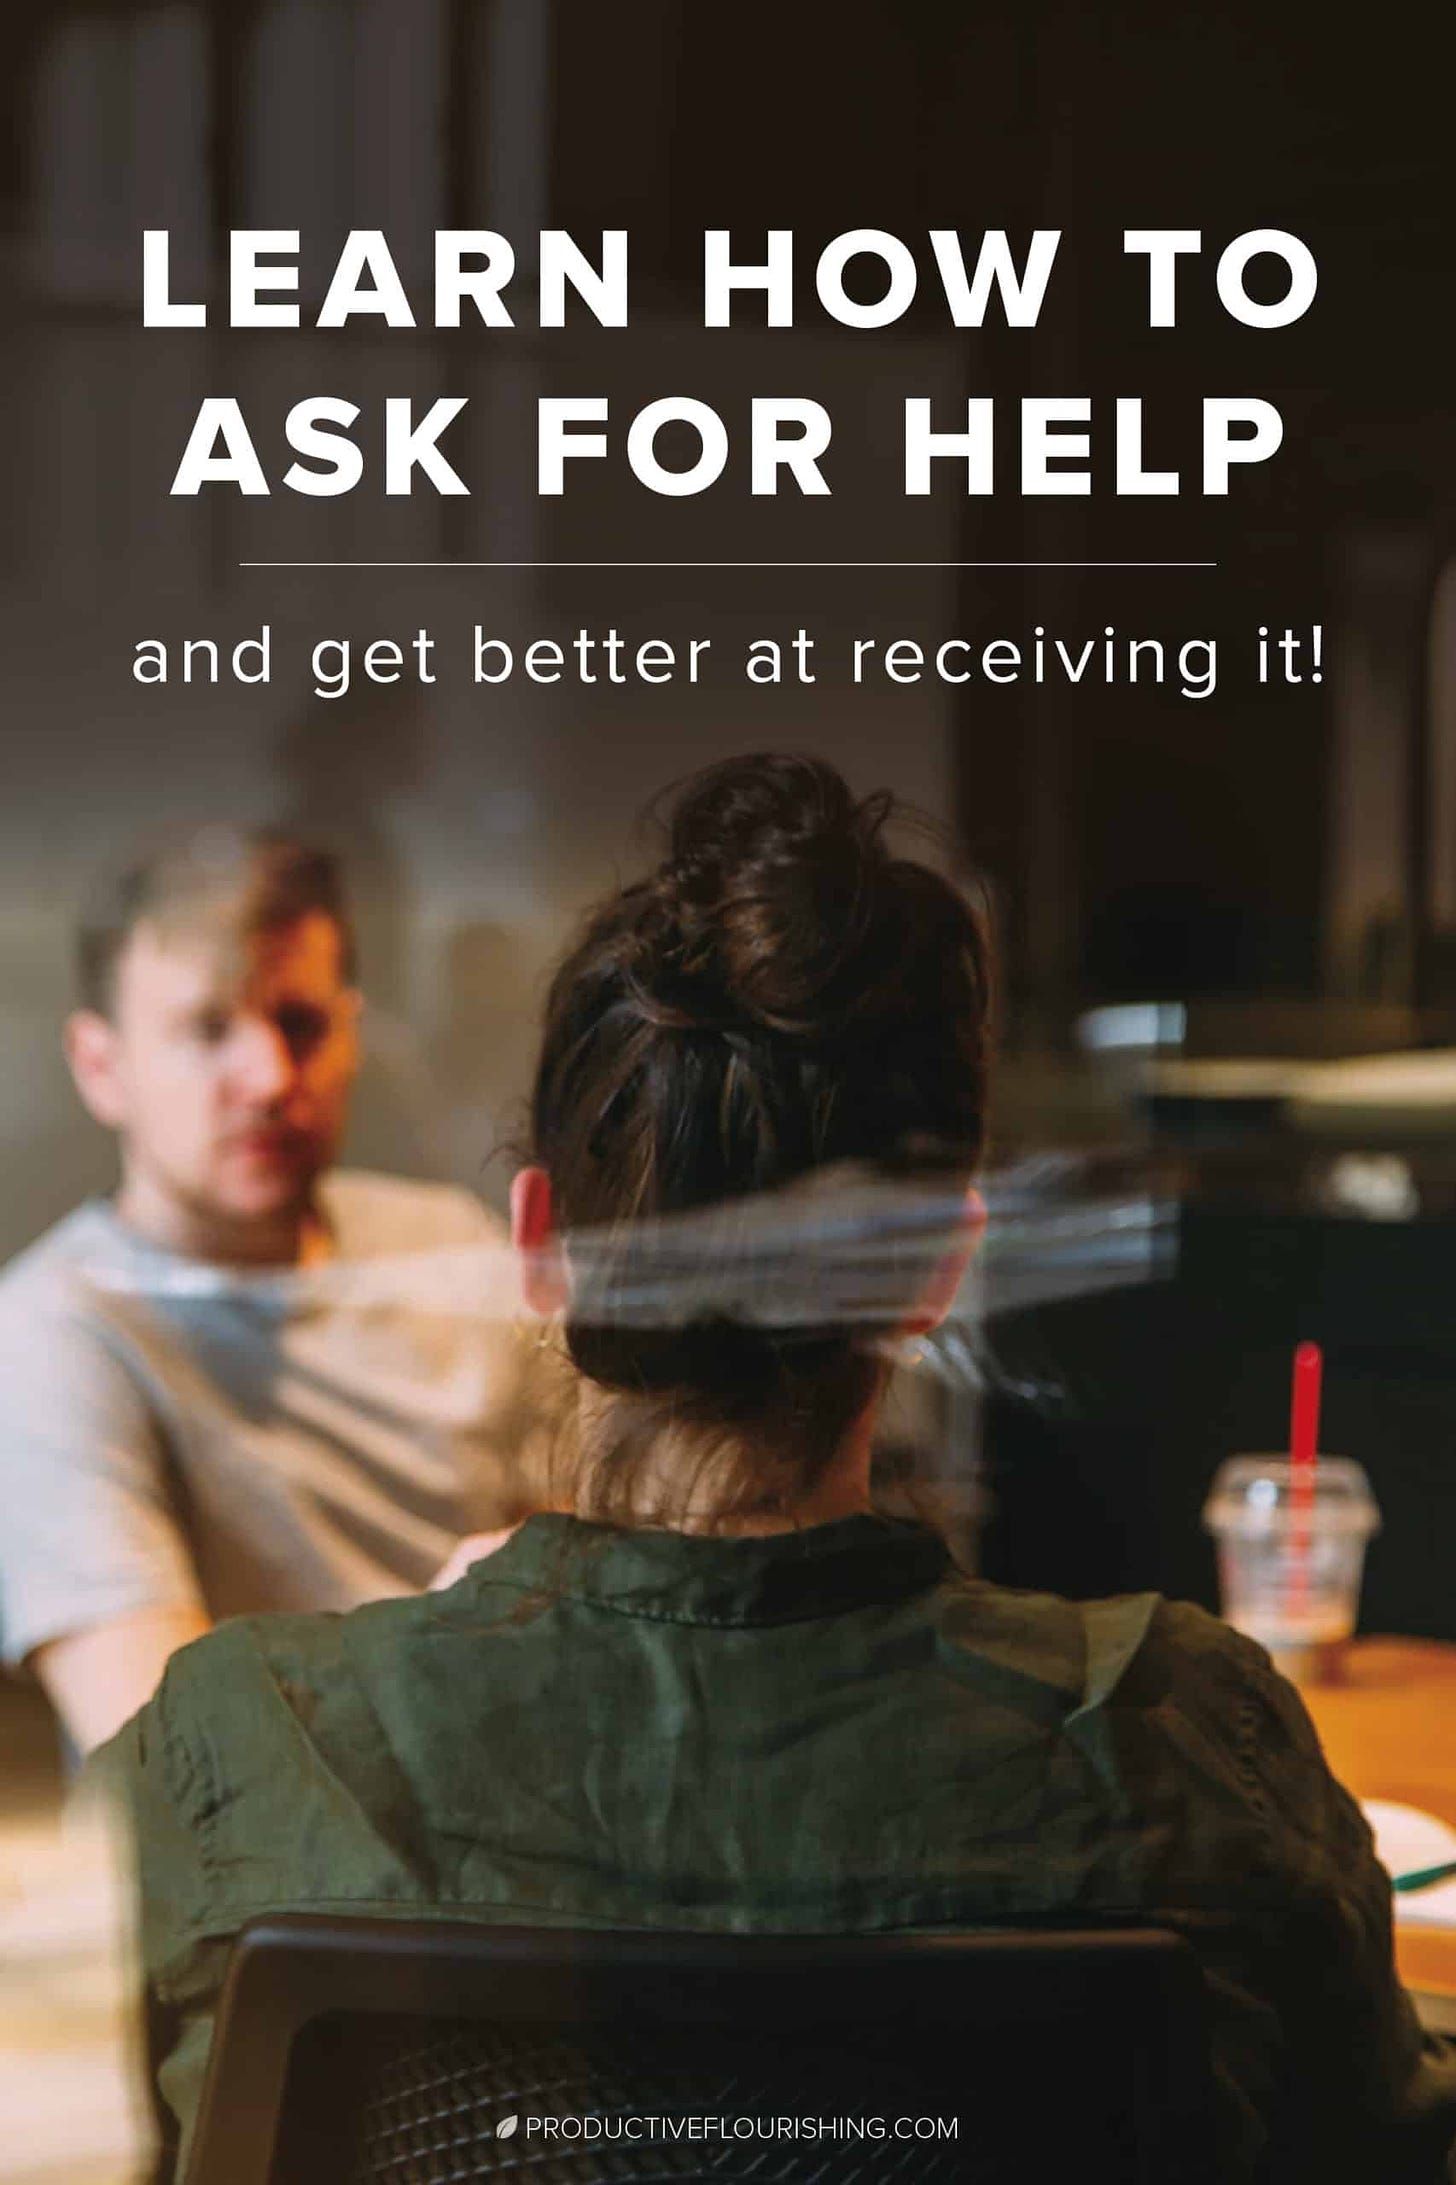 Learn How to Ask For Help. I used to suck at receiving help. Here are three ways I am learning to ask for and receive help. What habits can you build to ask for and receive the help — that’s freely given in a relational exchange rather than a transaction — you need? #askingforhelp #selfimprovement #productiveflourishing